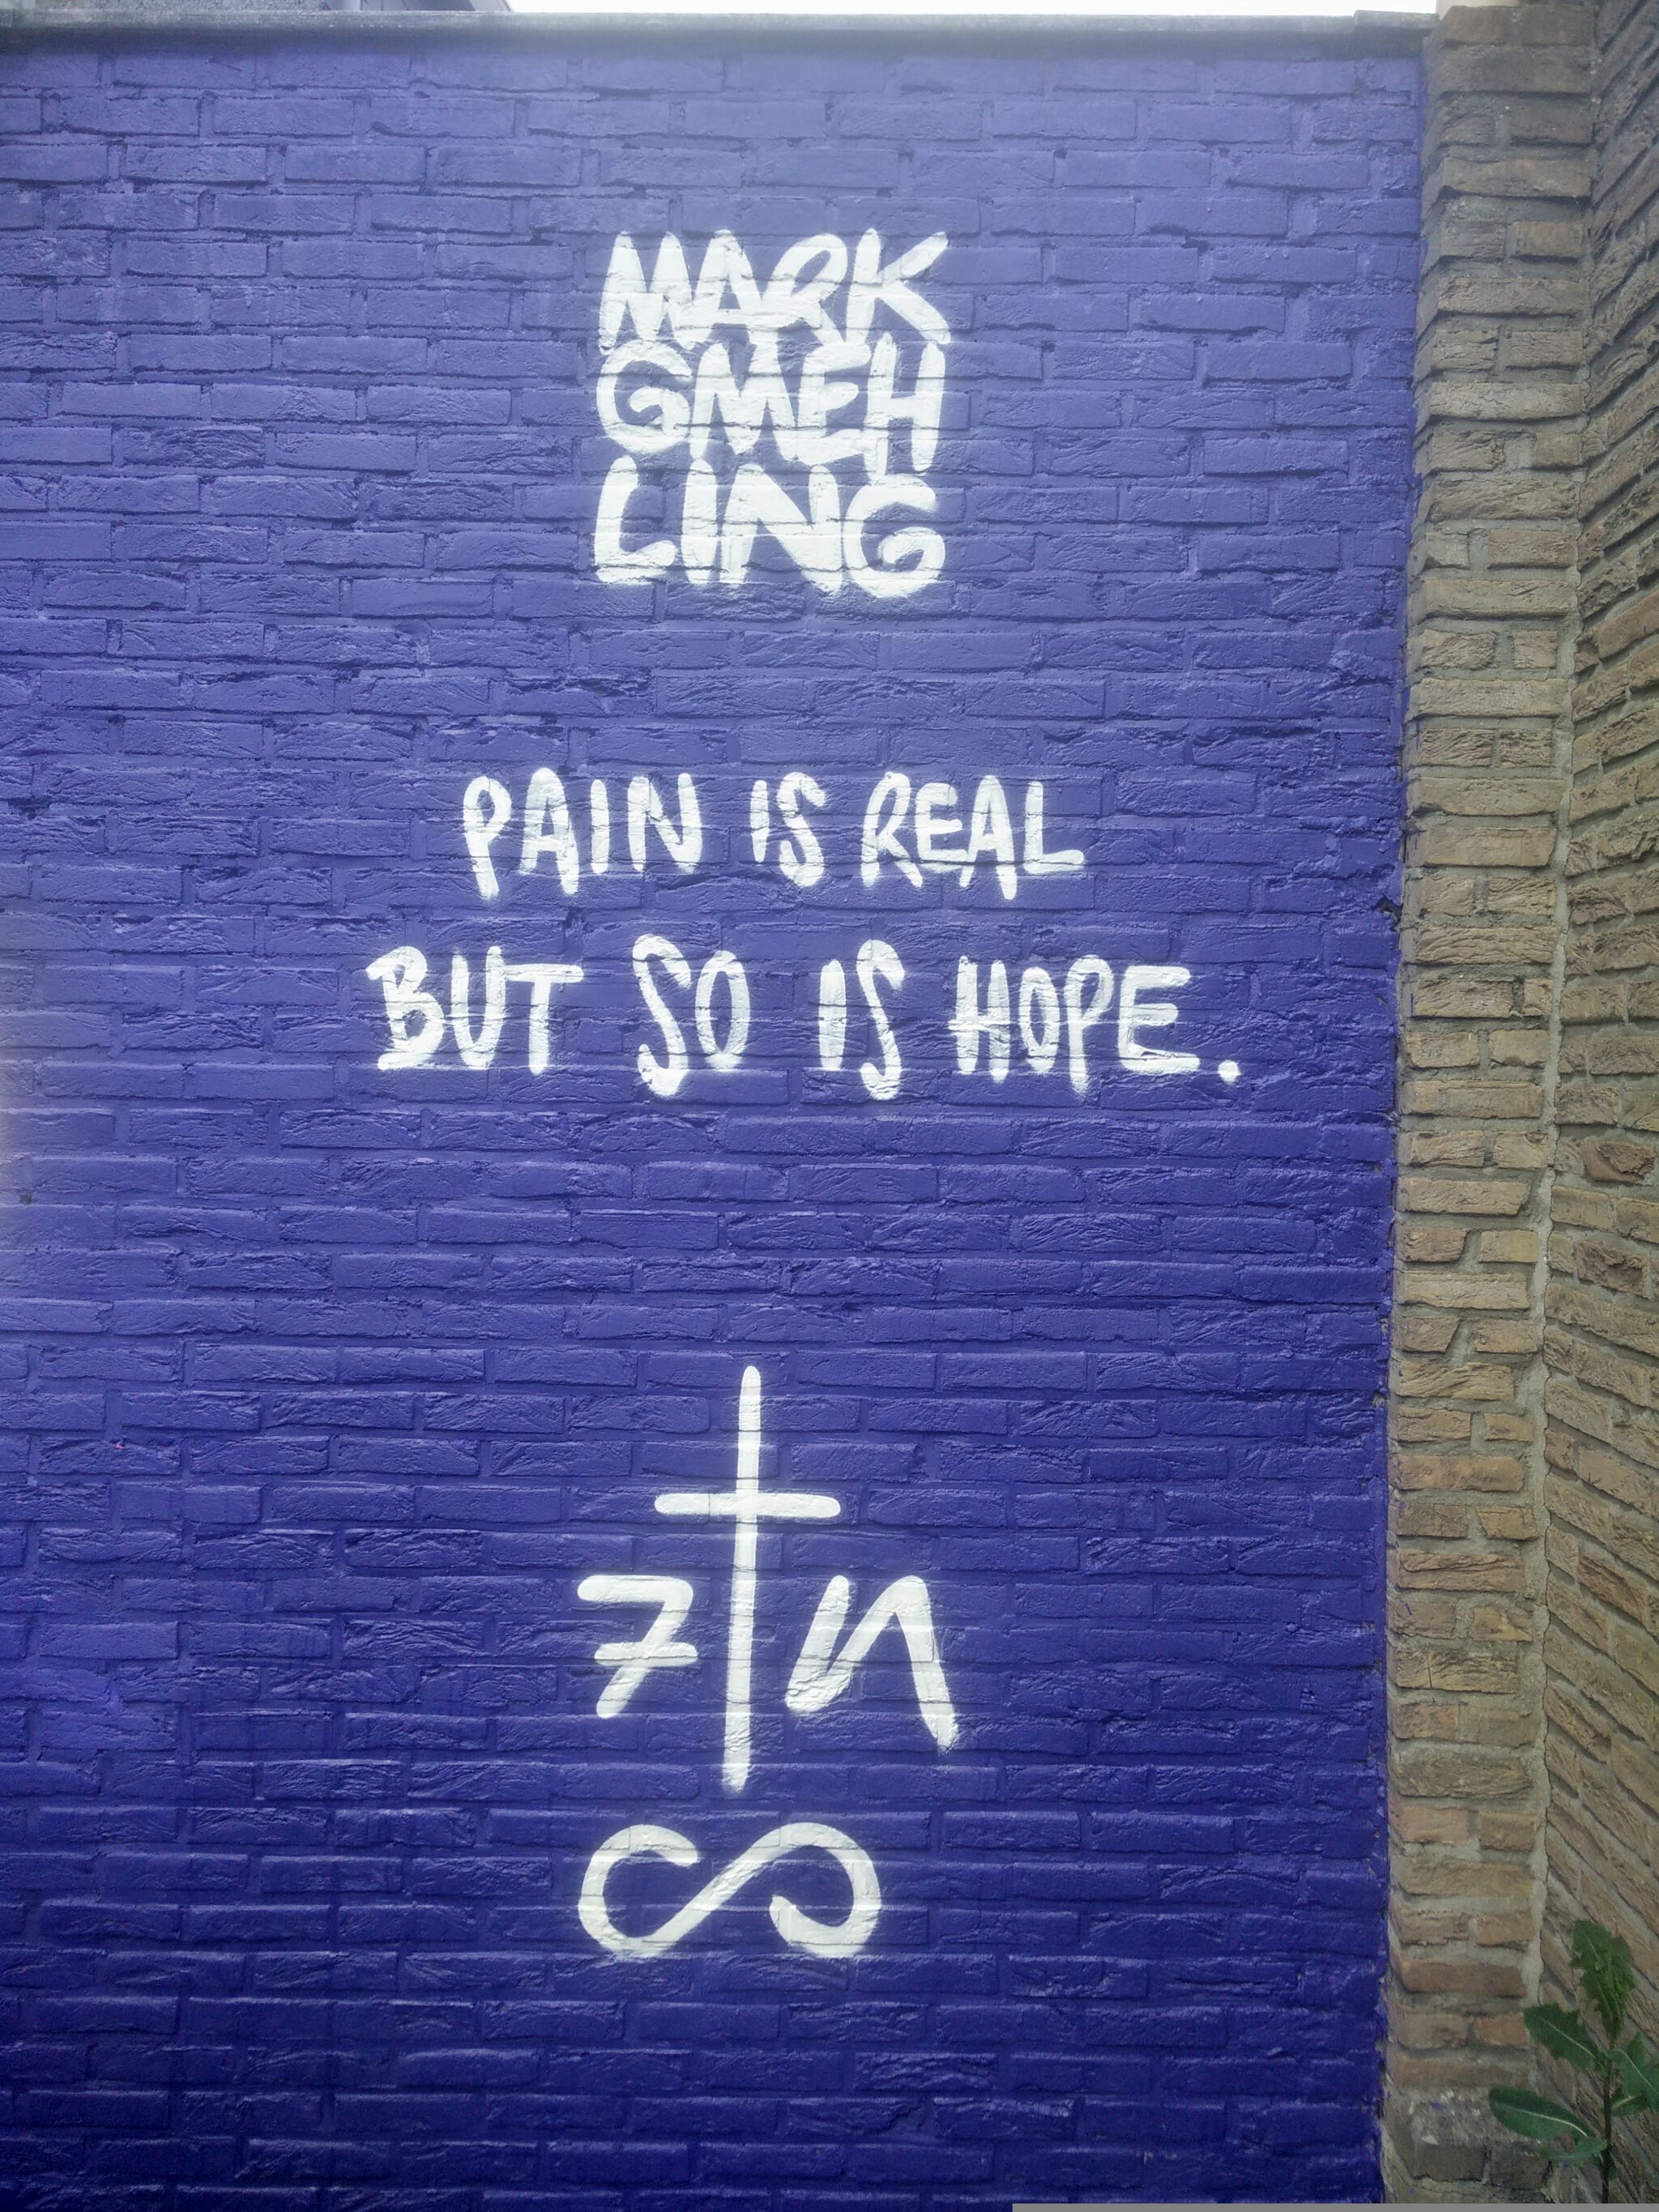 Mark Gmehling&mdash;Pain is real, but so is hope